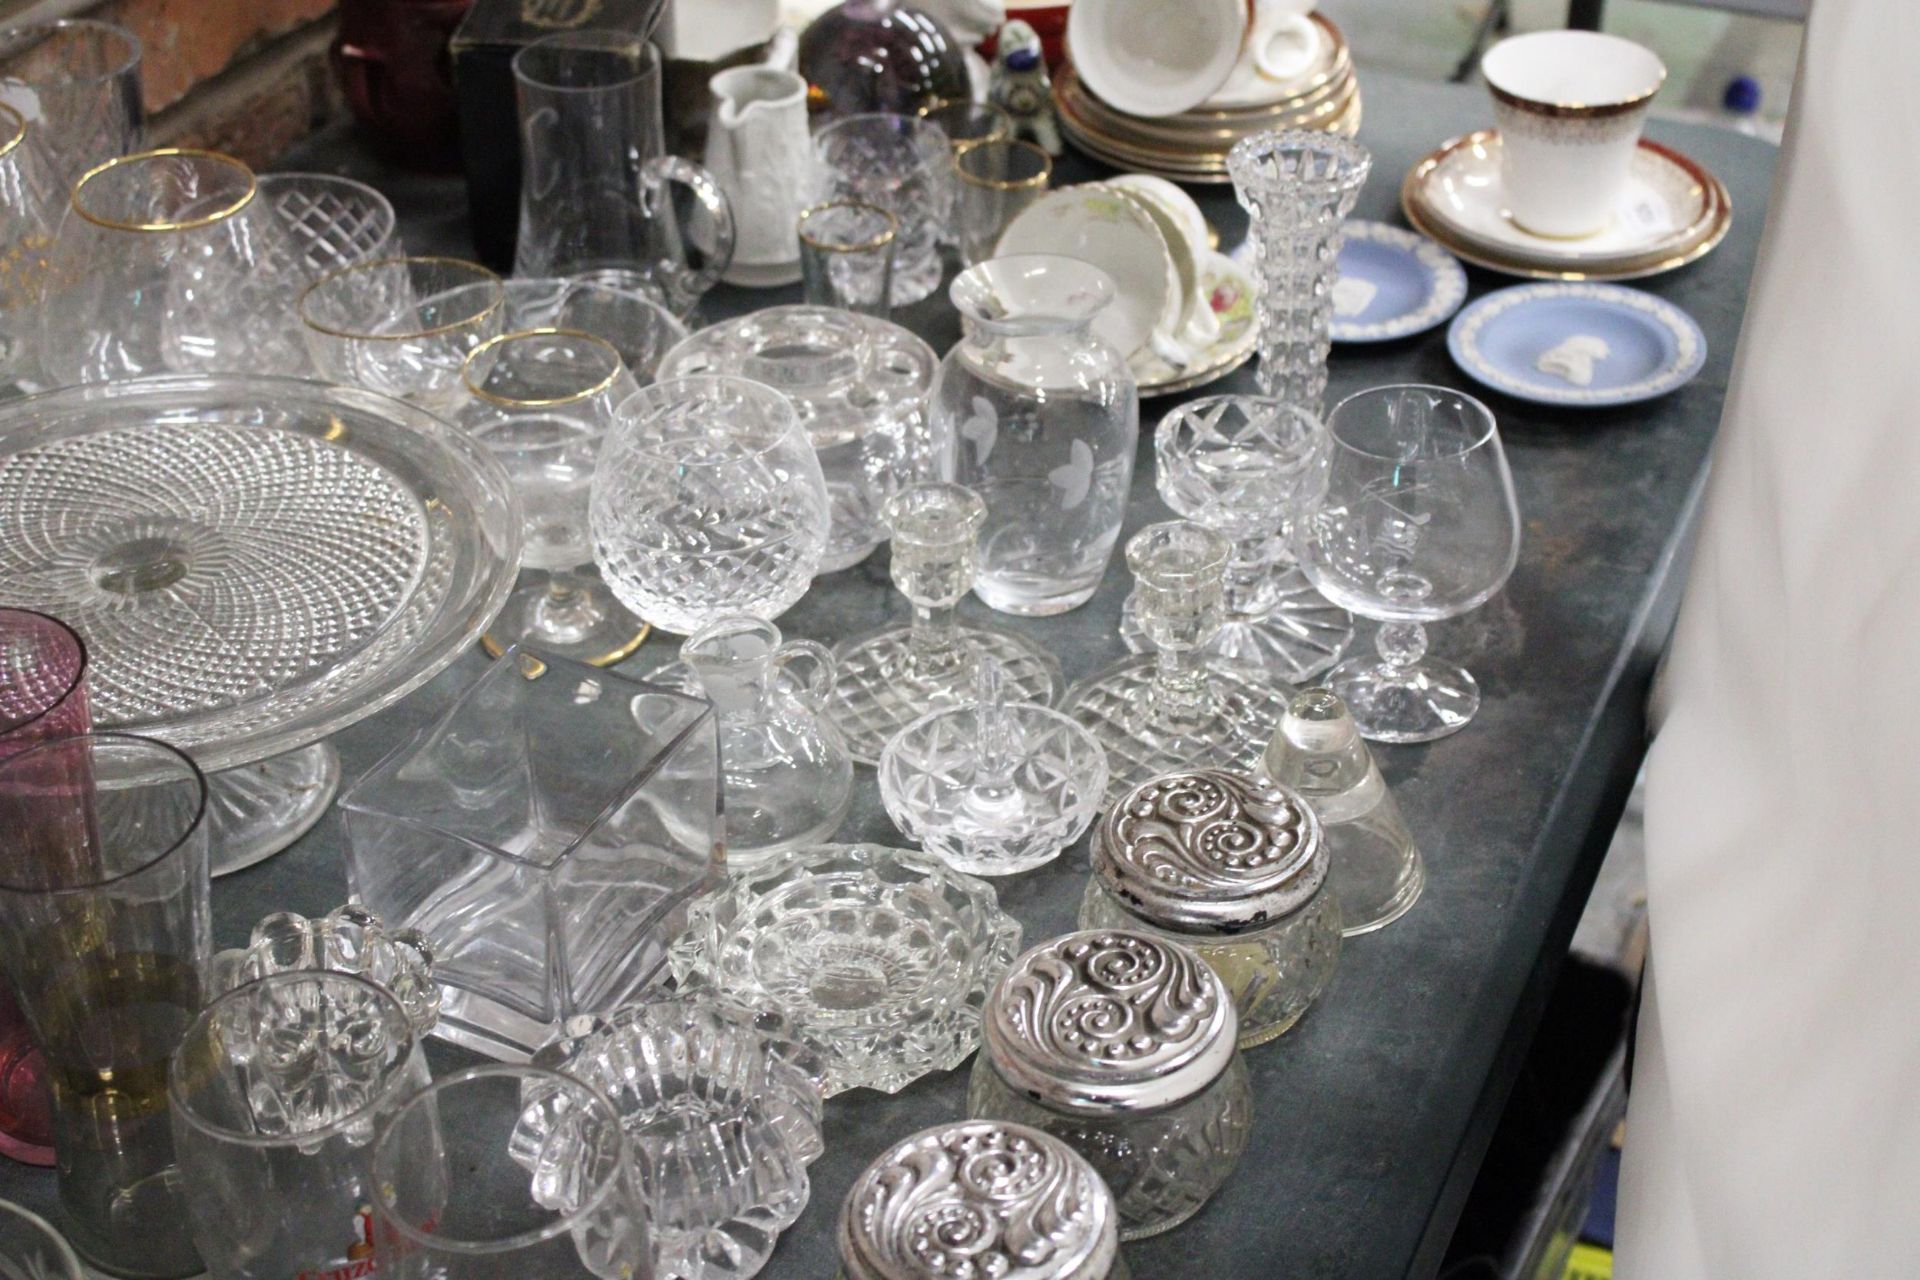 A LARGE COLLECTION OF GLASSWARE TO INCLUDE CRYSTAL BRANDY BALLOONS, FOOTED CAKE STAND, VASE, ROSE - Image 3 of 6